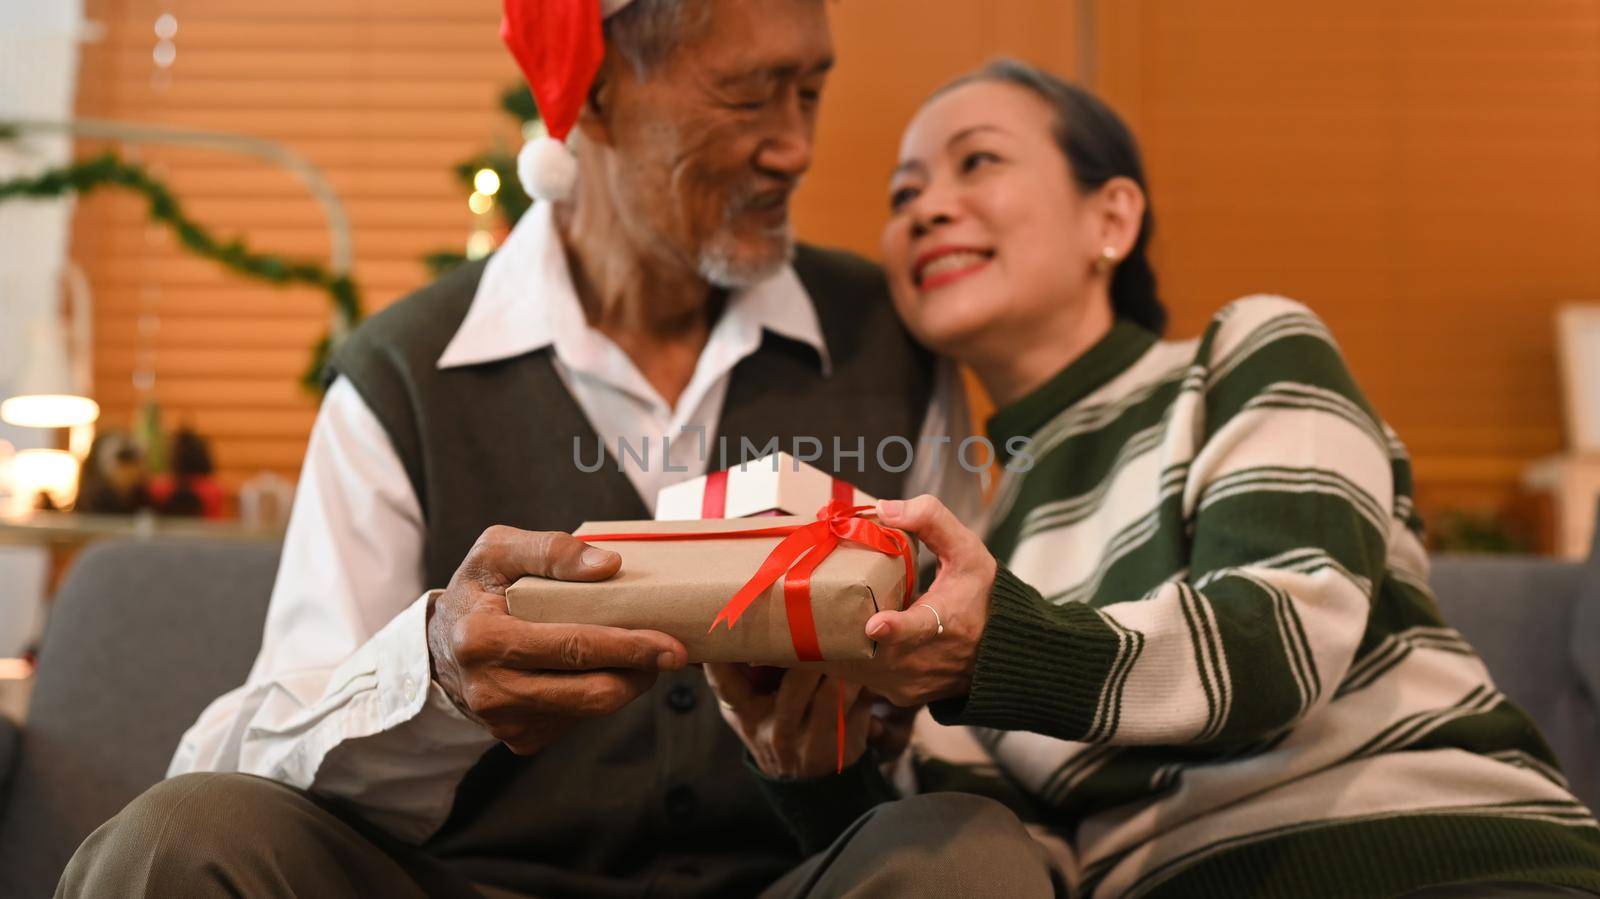 Happy senior couple celebrating Christmas together at home lighted with soft lights and candles. Holidays and people concept.